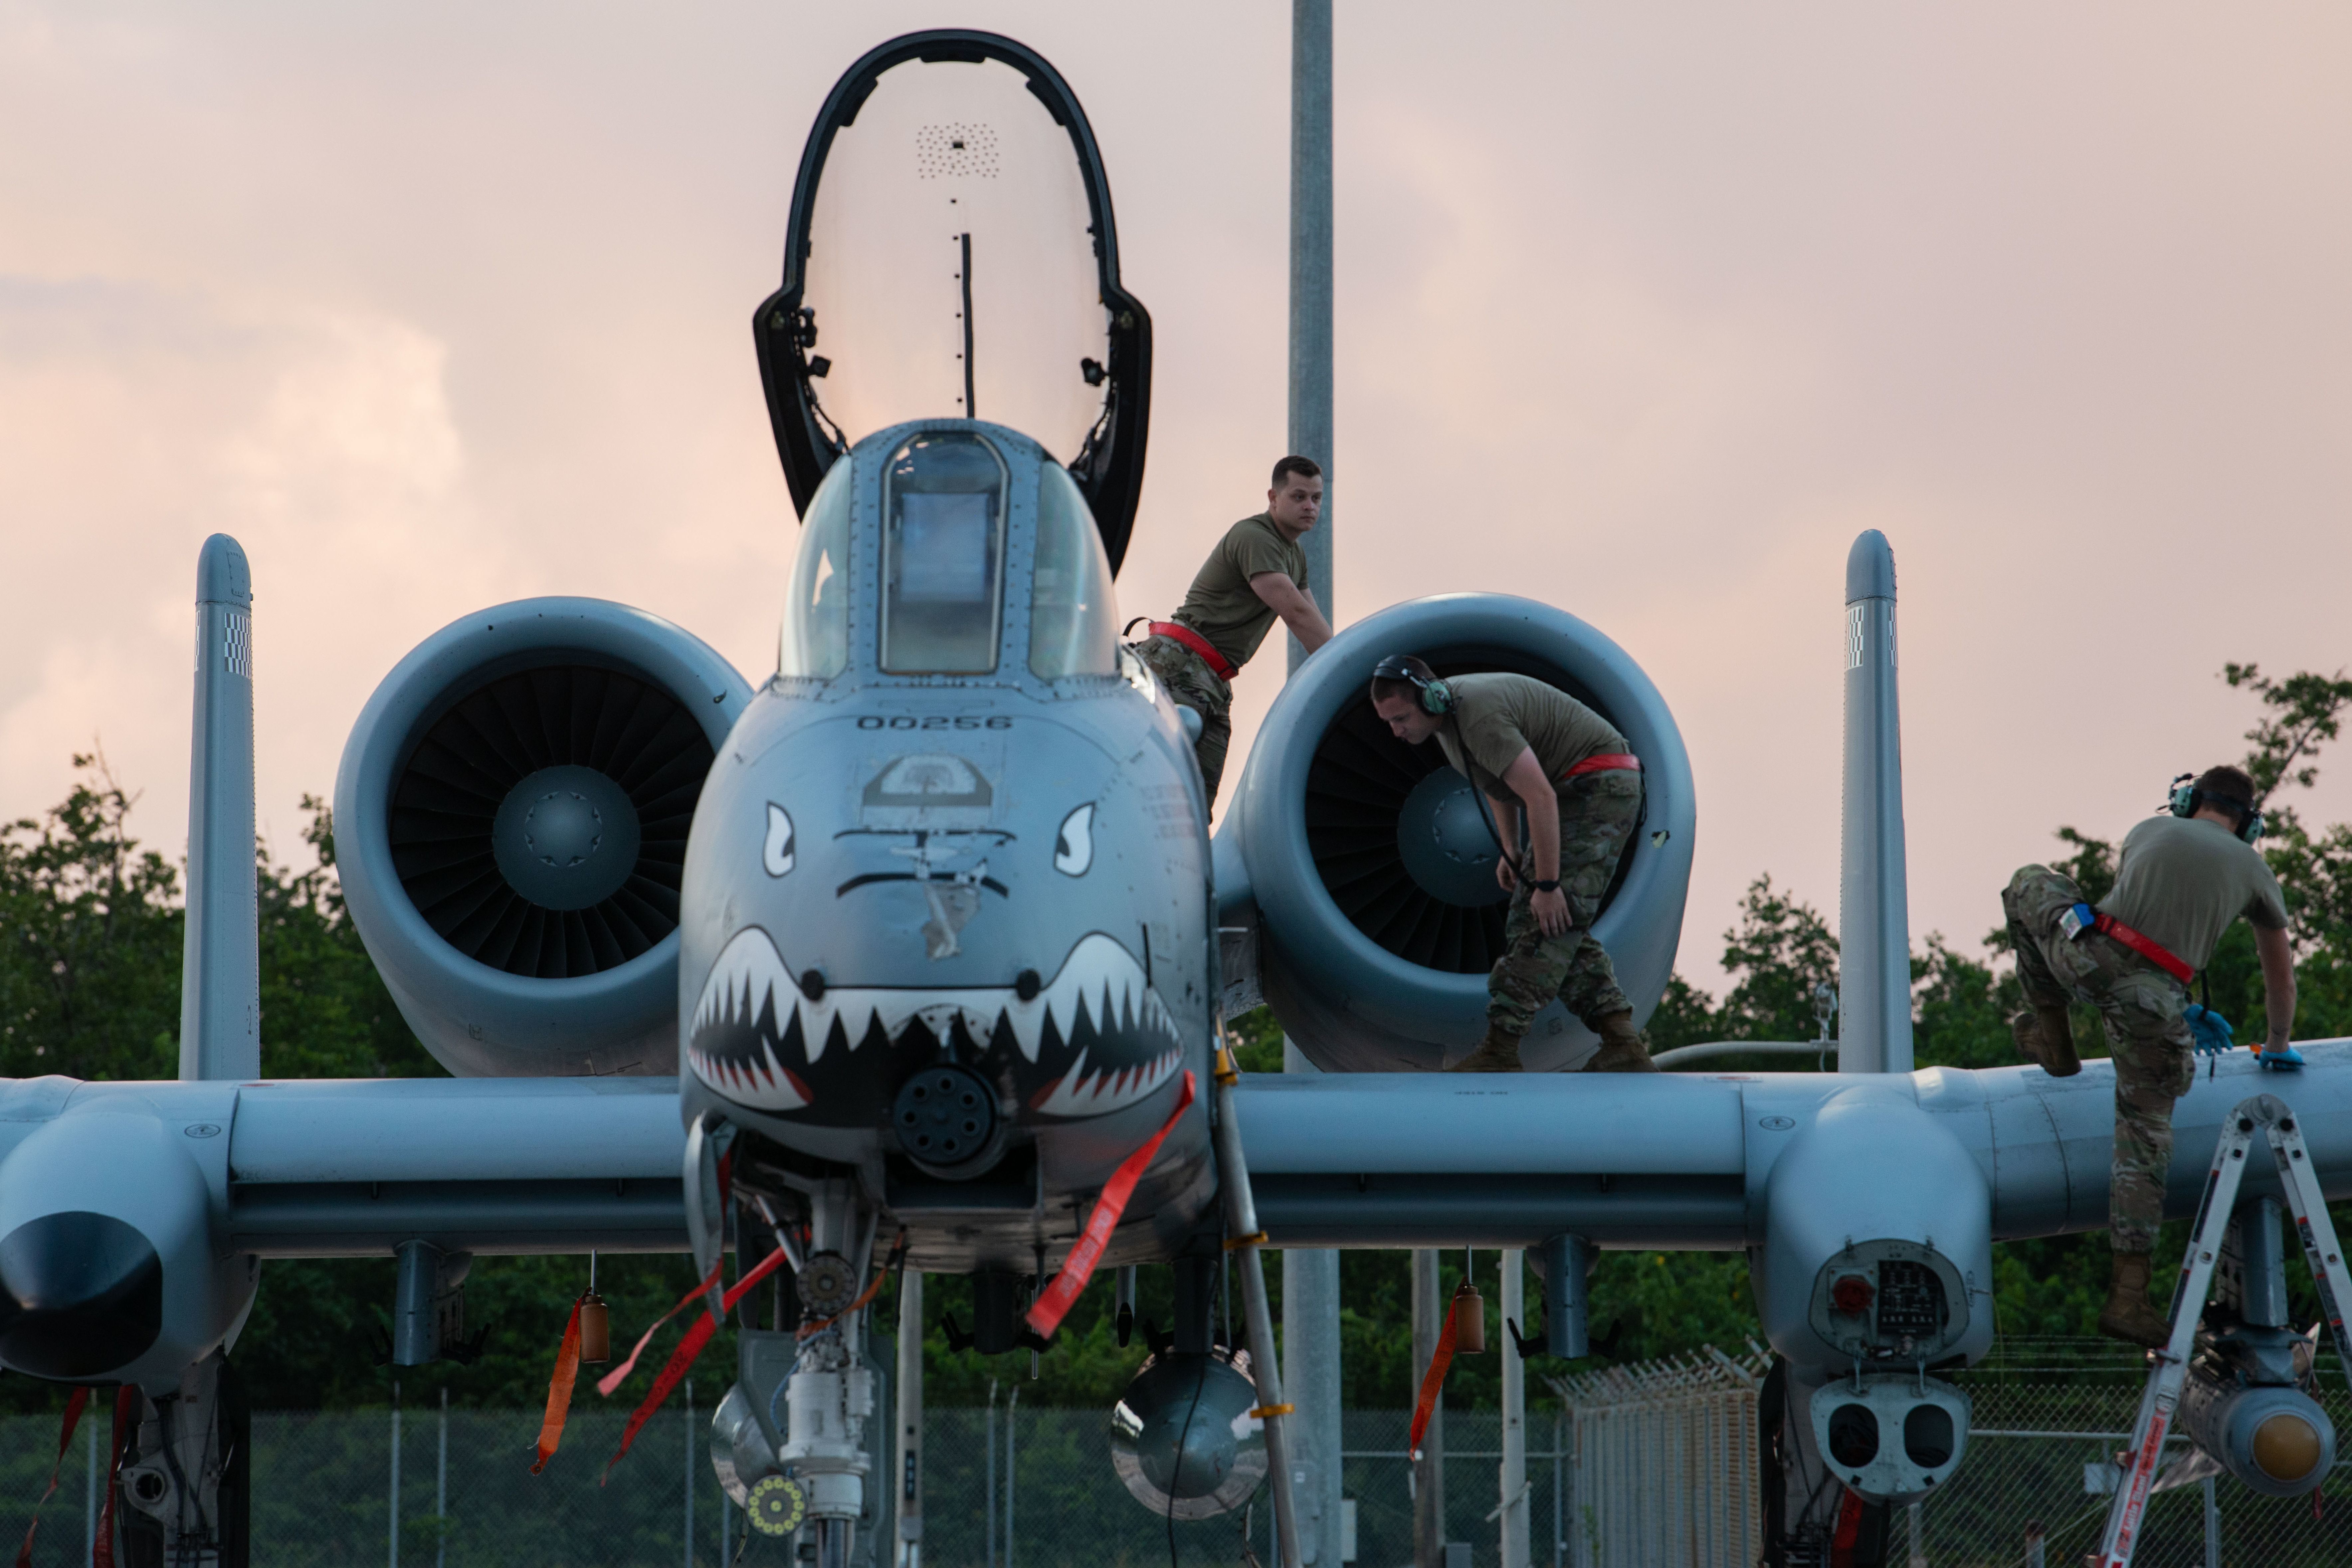 A-10 Thunderbolt II ("Warthog") displaying the time-honored shark mouth